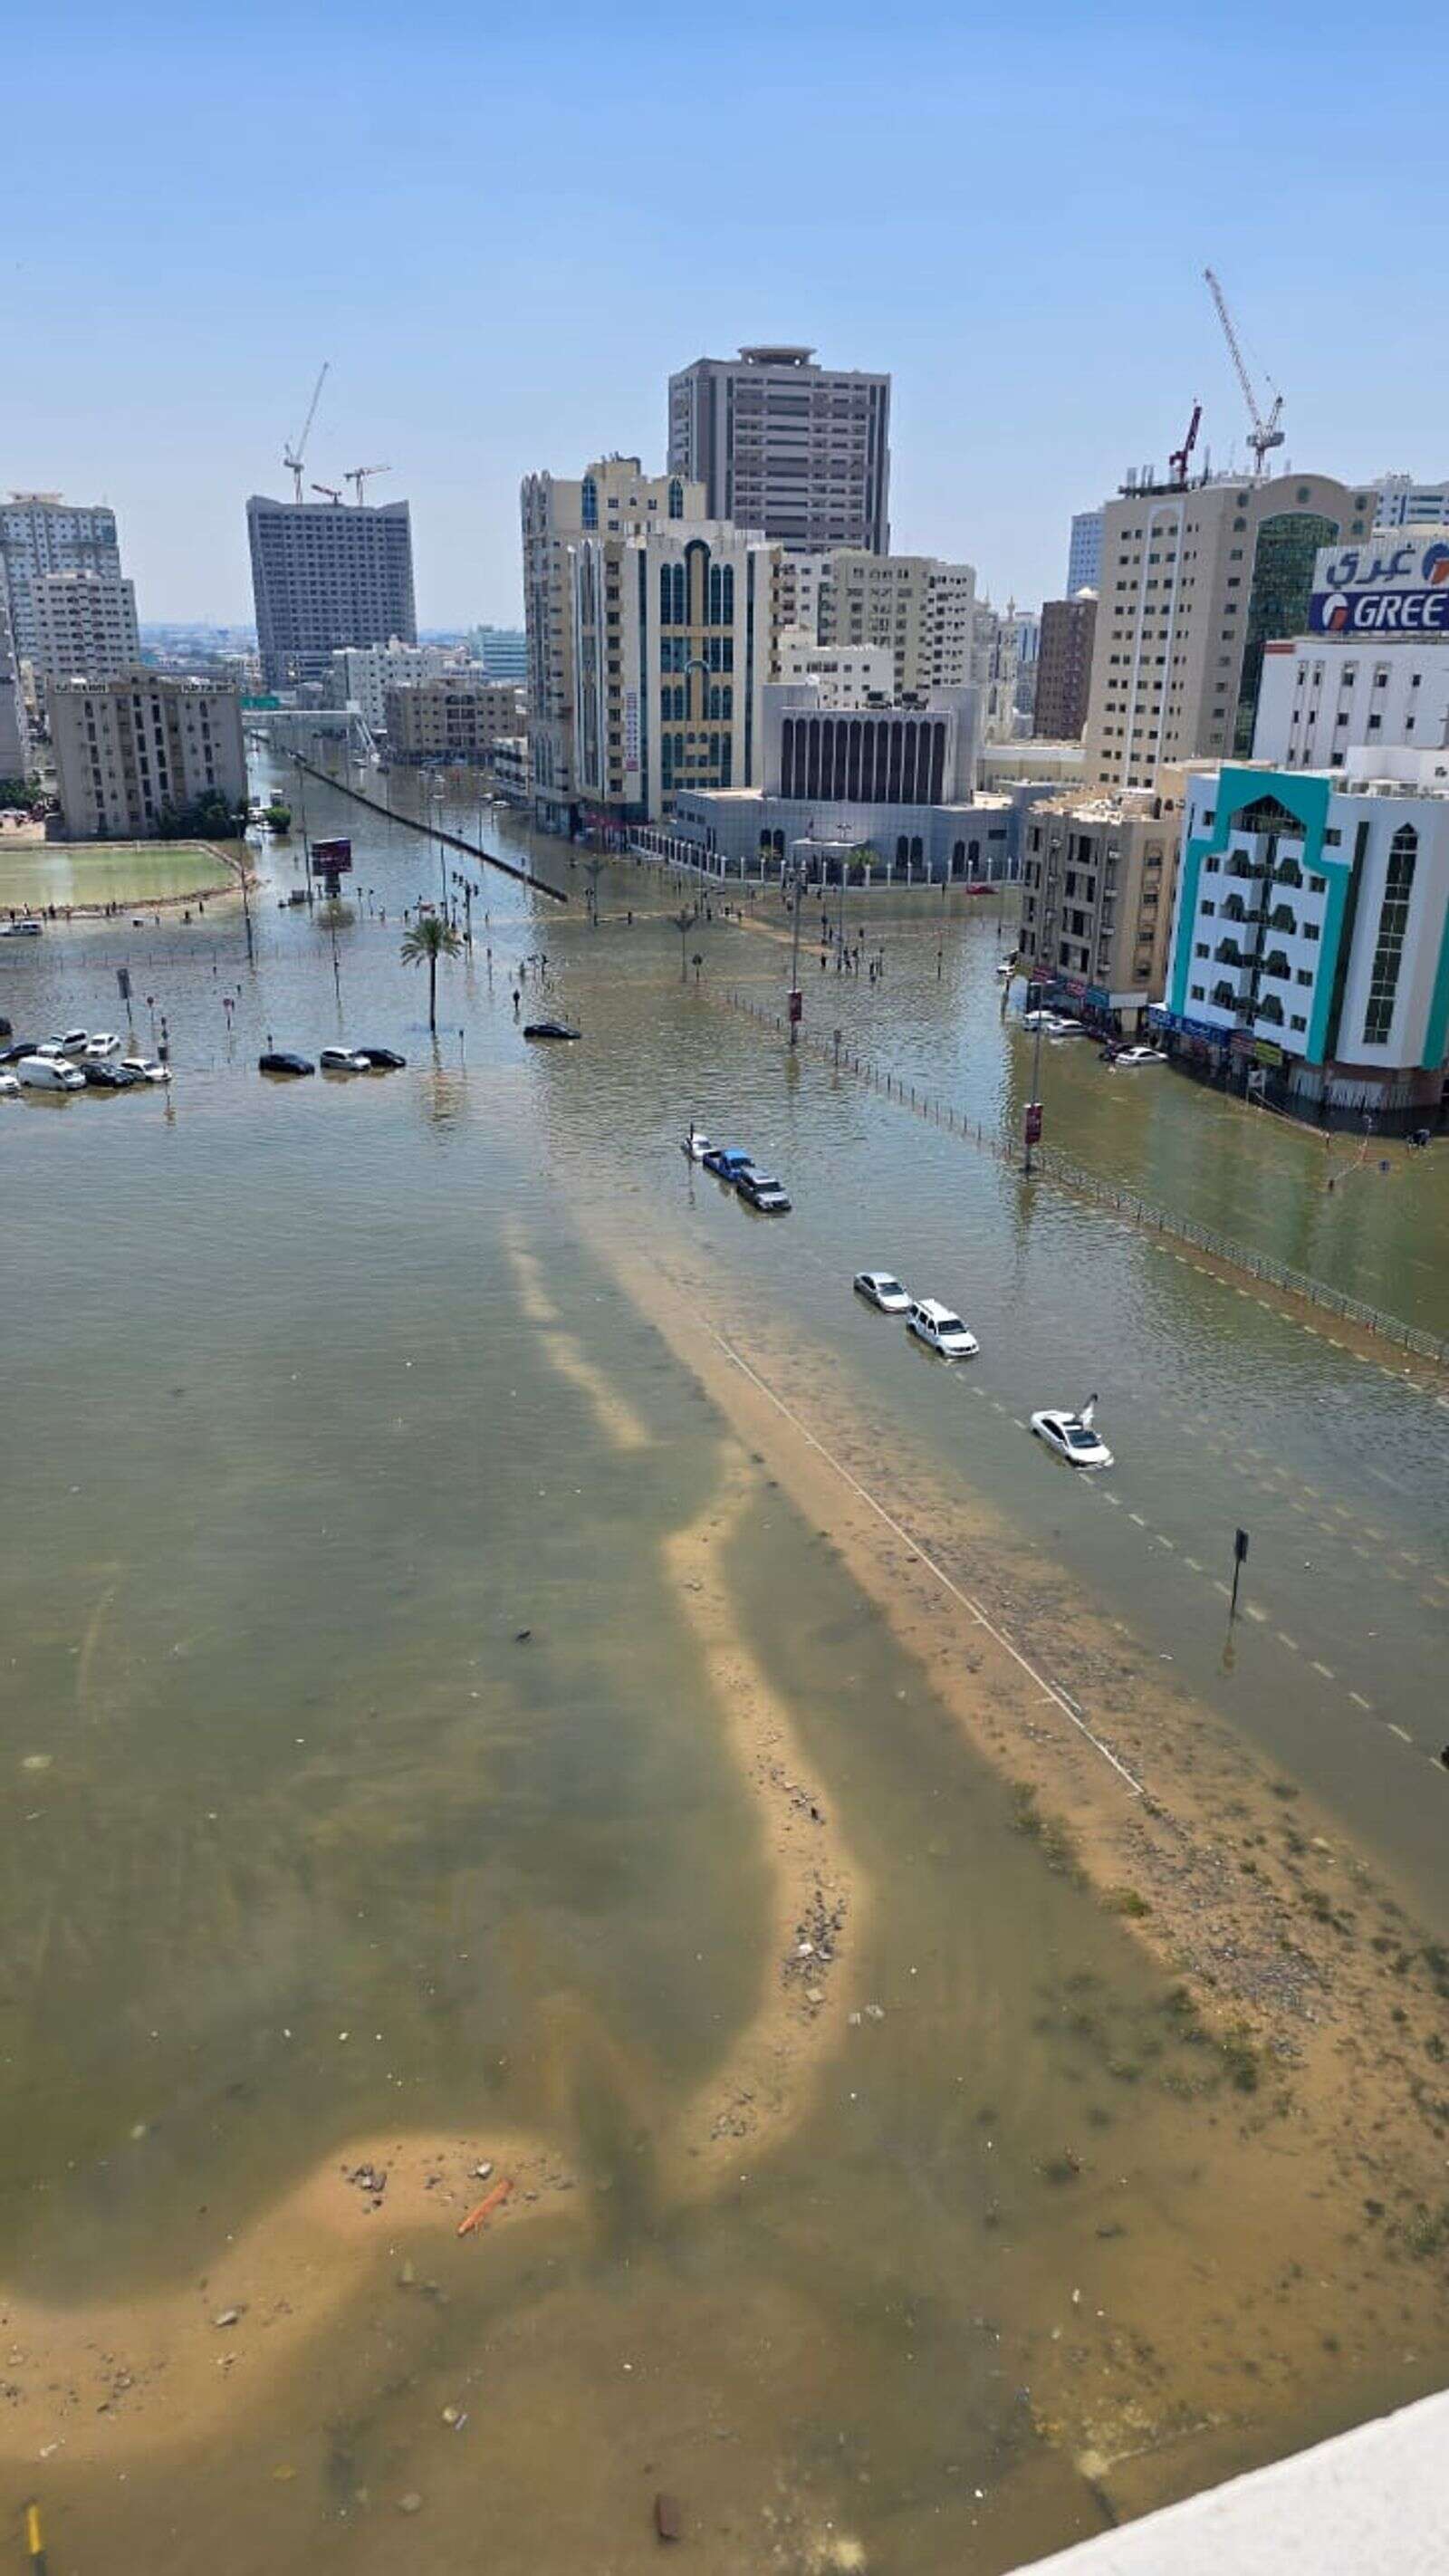 sharjah launches whatsapp number for families stranded at home after heavy rains